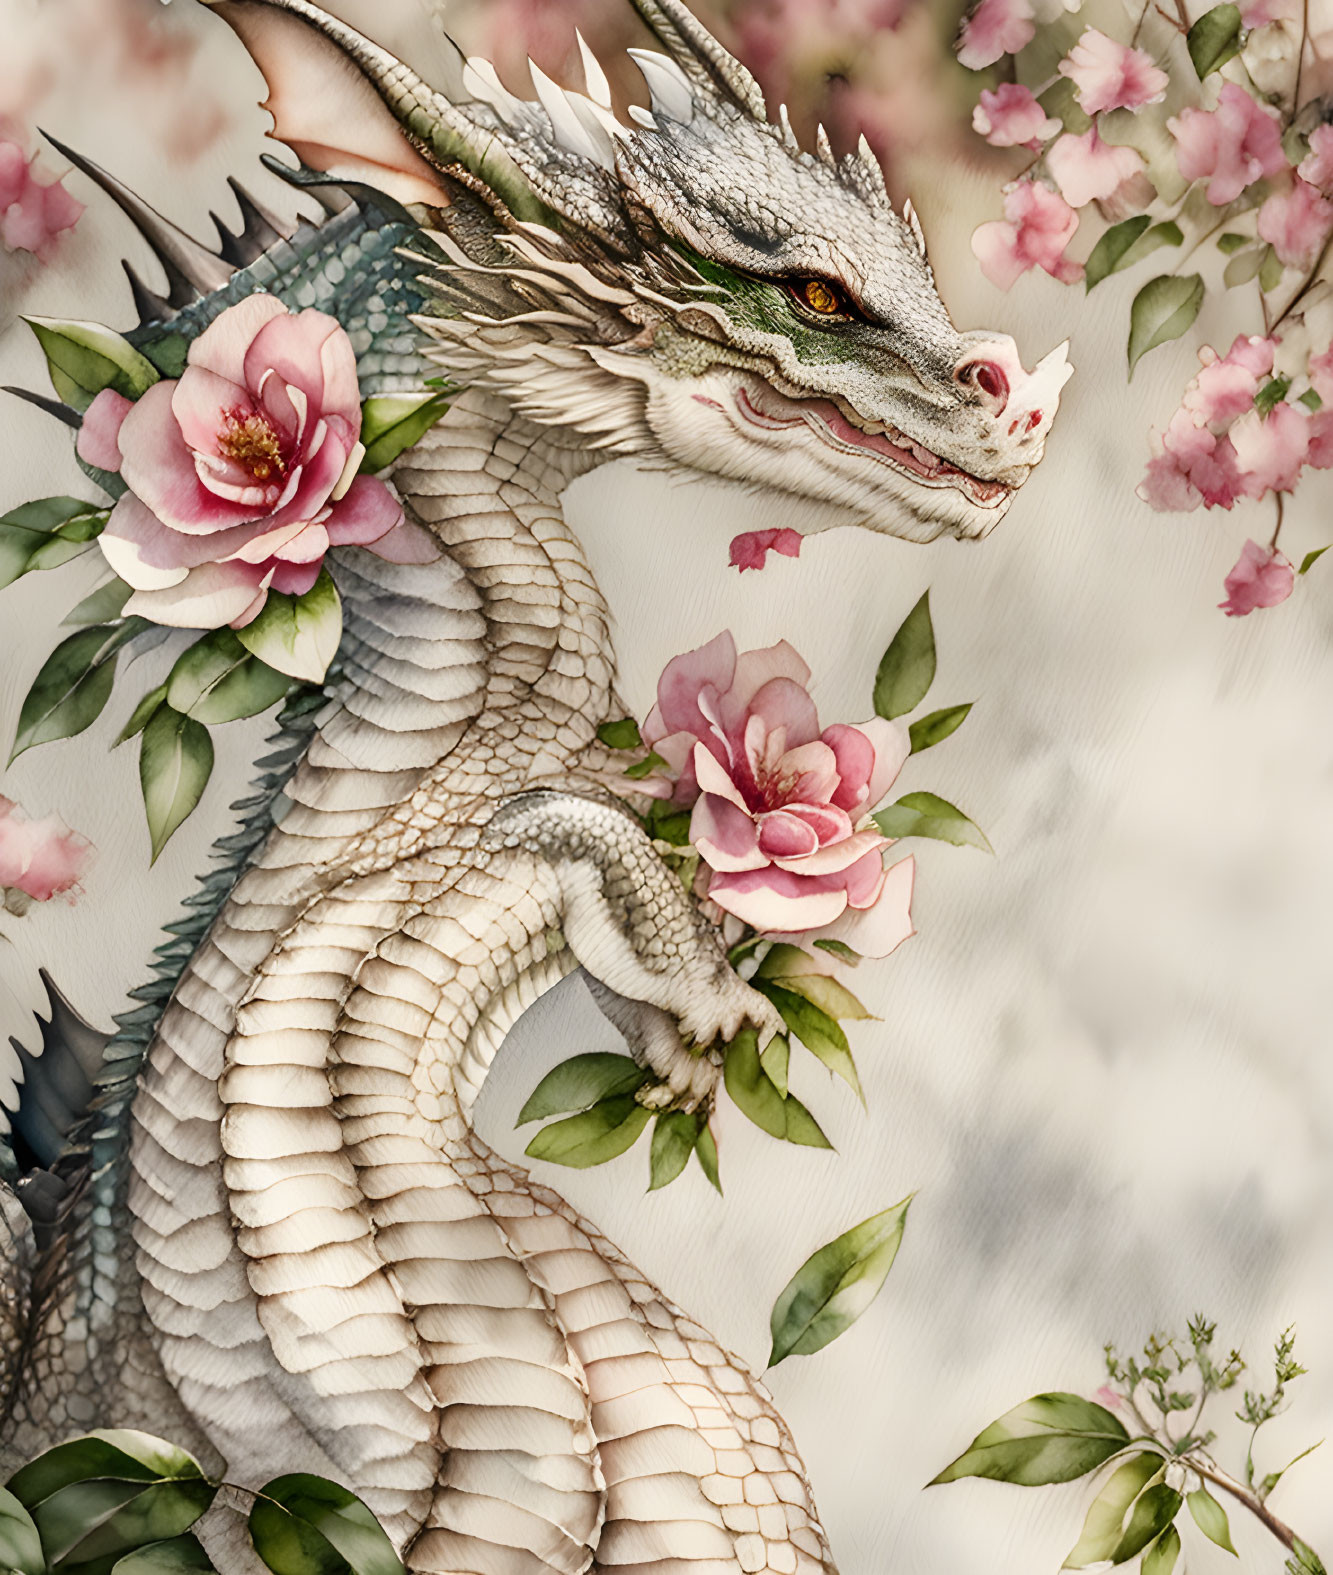 Detailed Dragon Illustration Among Pink Blooms and Textured Scales